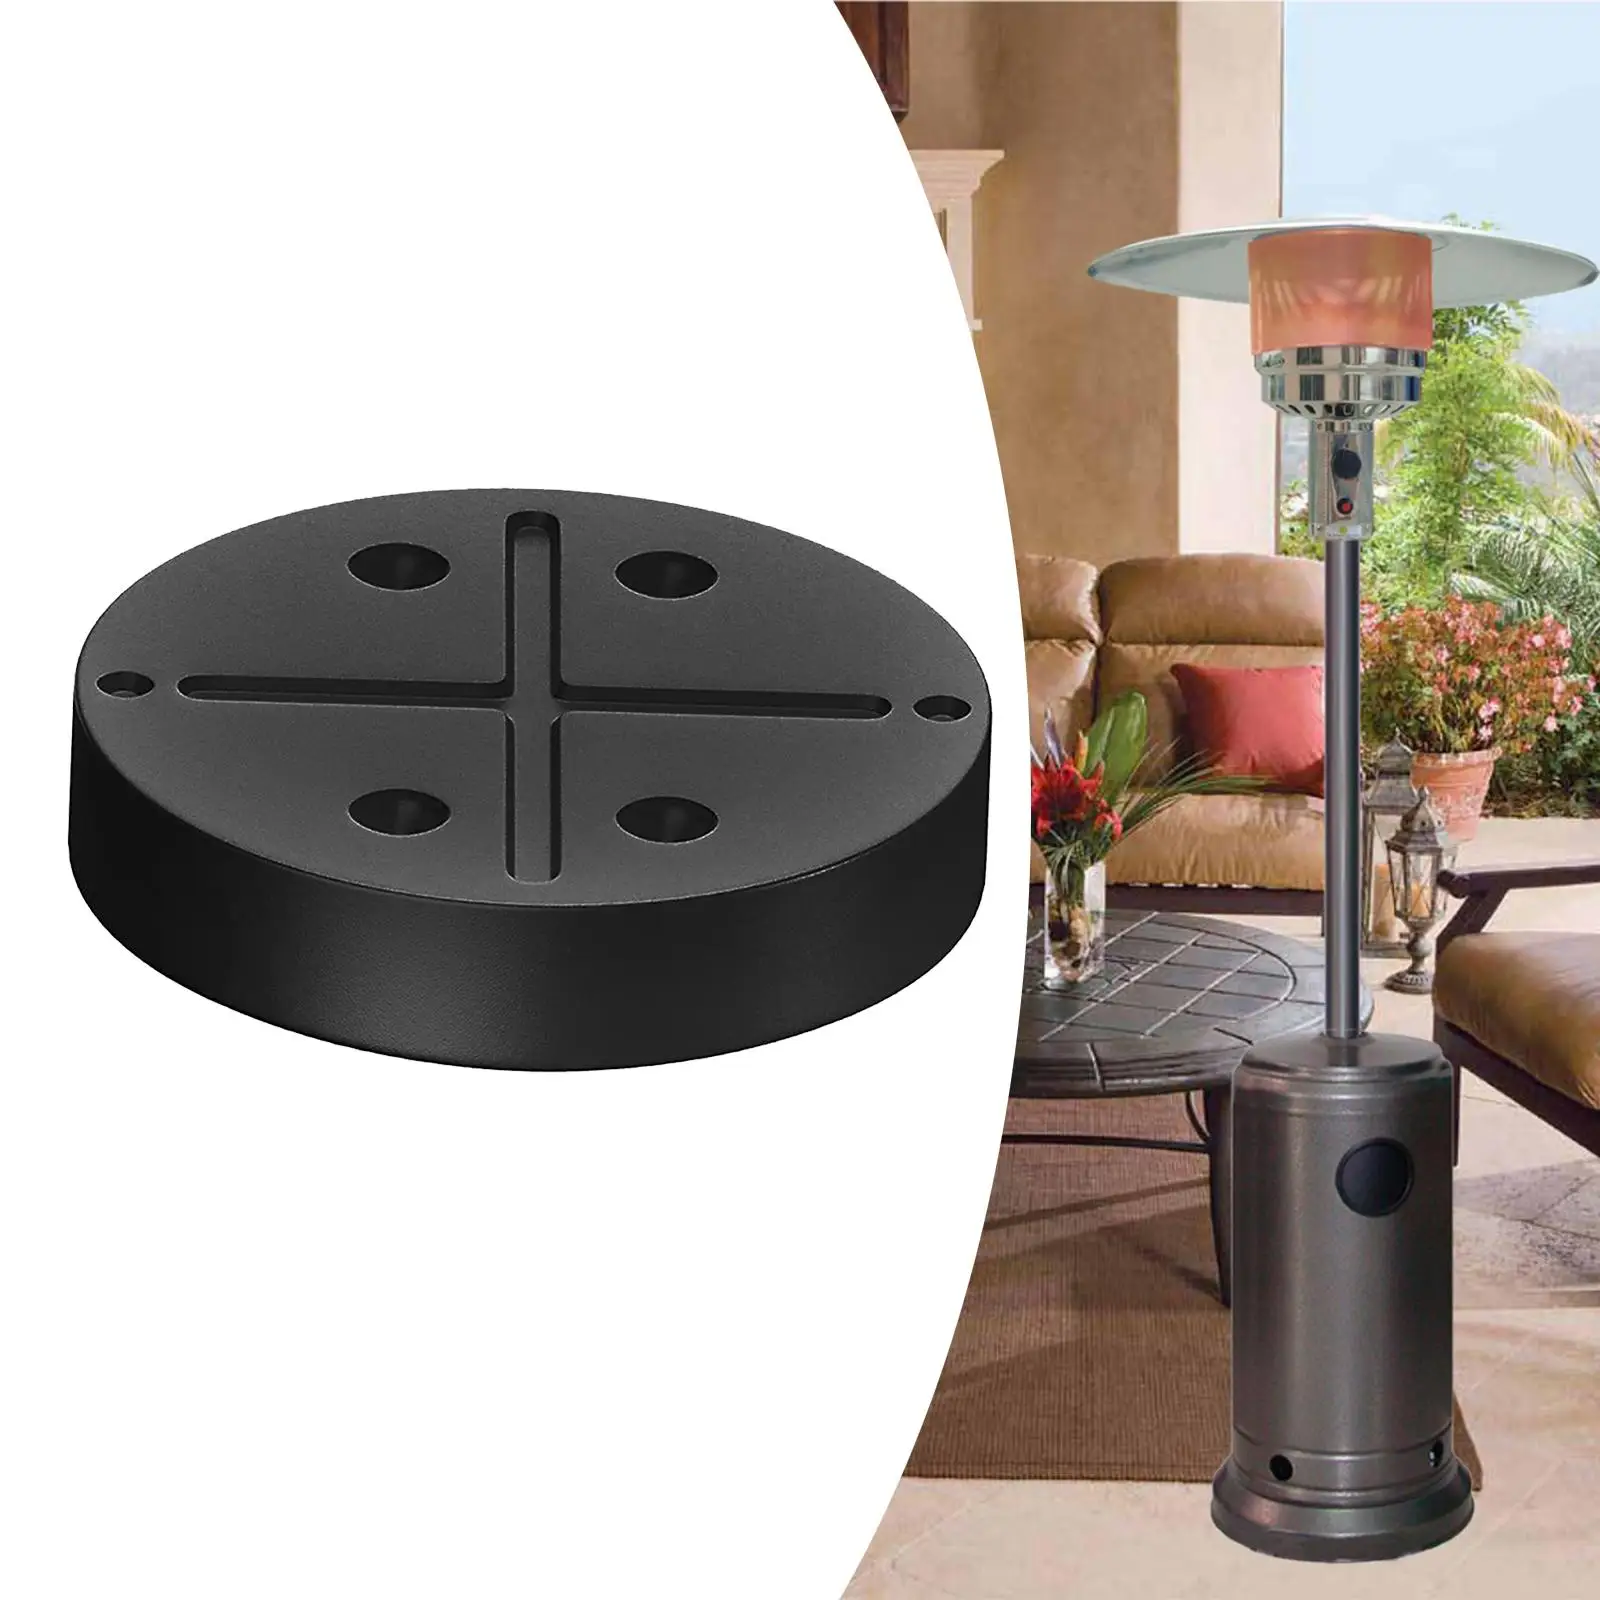 Patio Heater Sand Box/Water Box Spare Parts Premium Replacement Increase The Stability of Patio Heaters Patio Heater Accessory